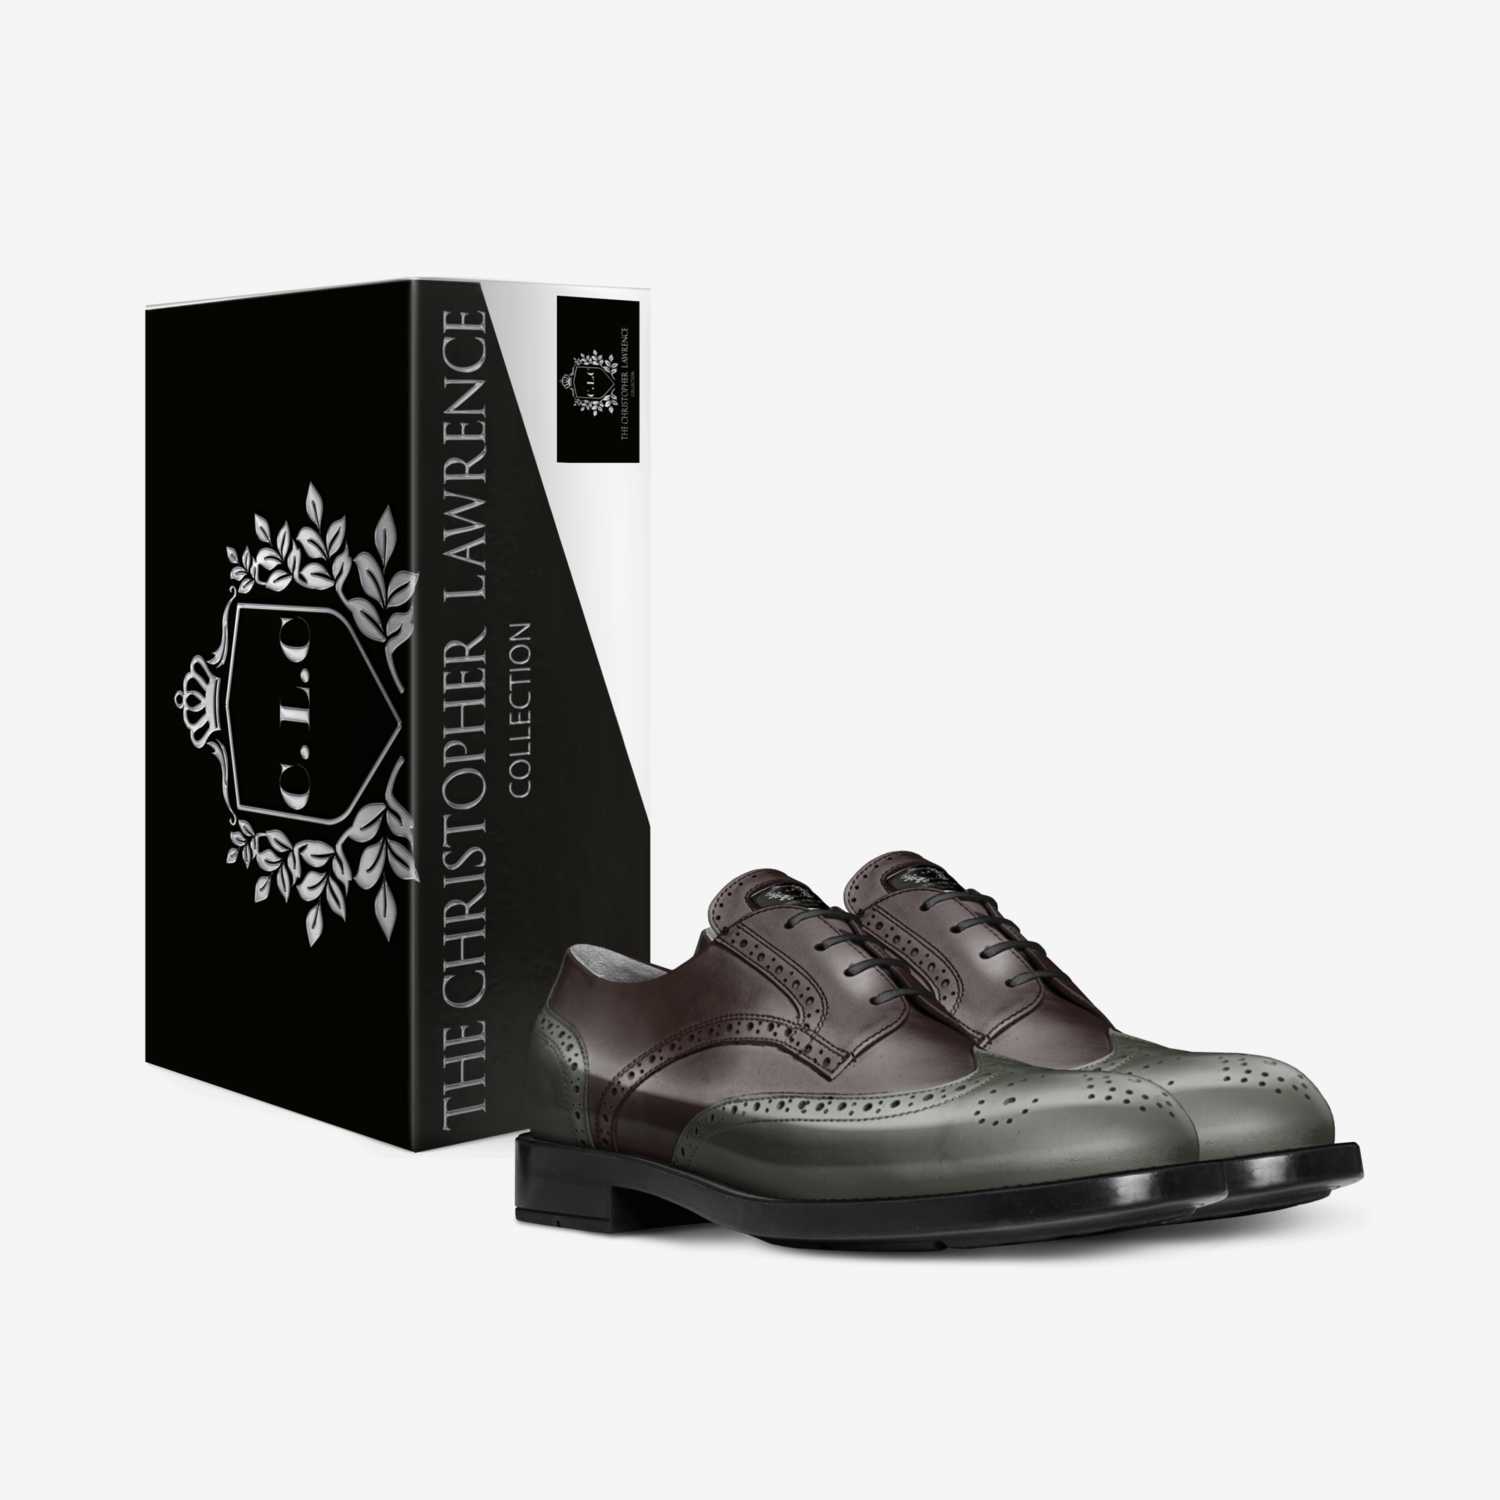 GM custom made in Italy shoes by Christopher Lawrence | Box view